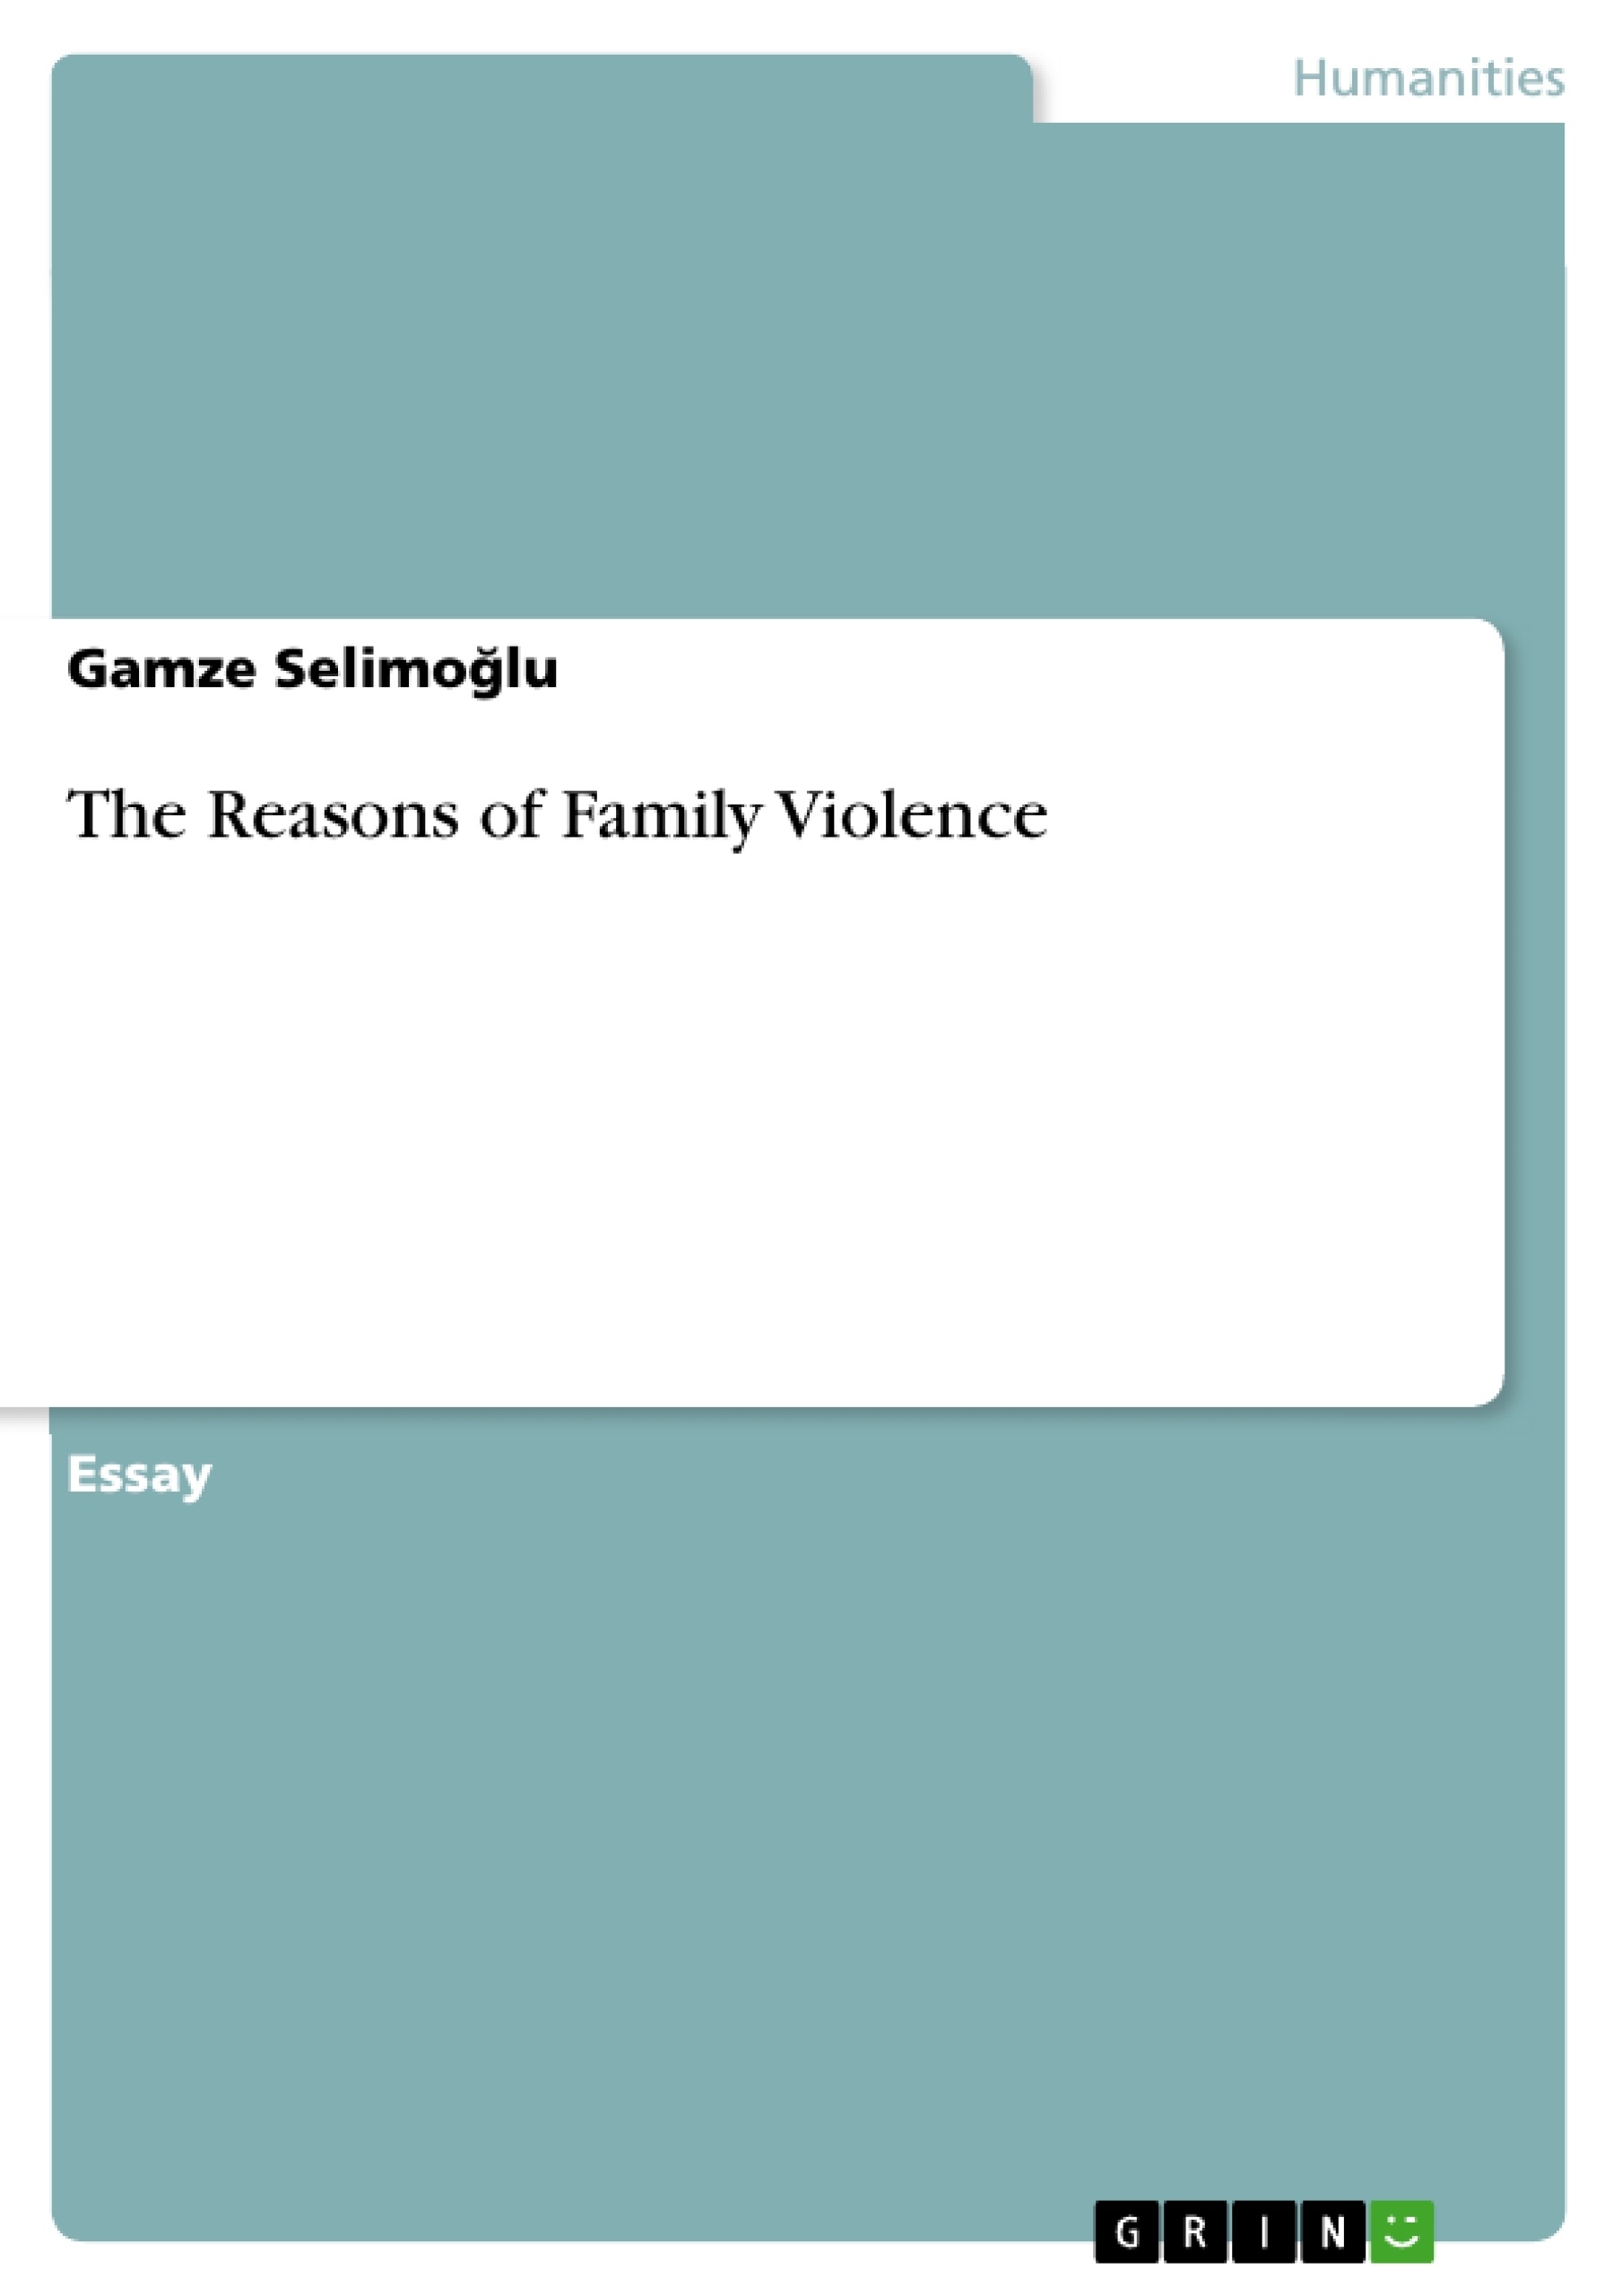 Title: The Reasons of Family Violence